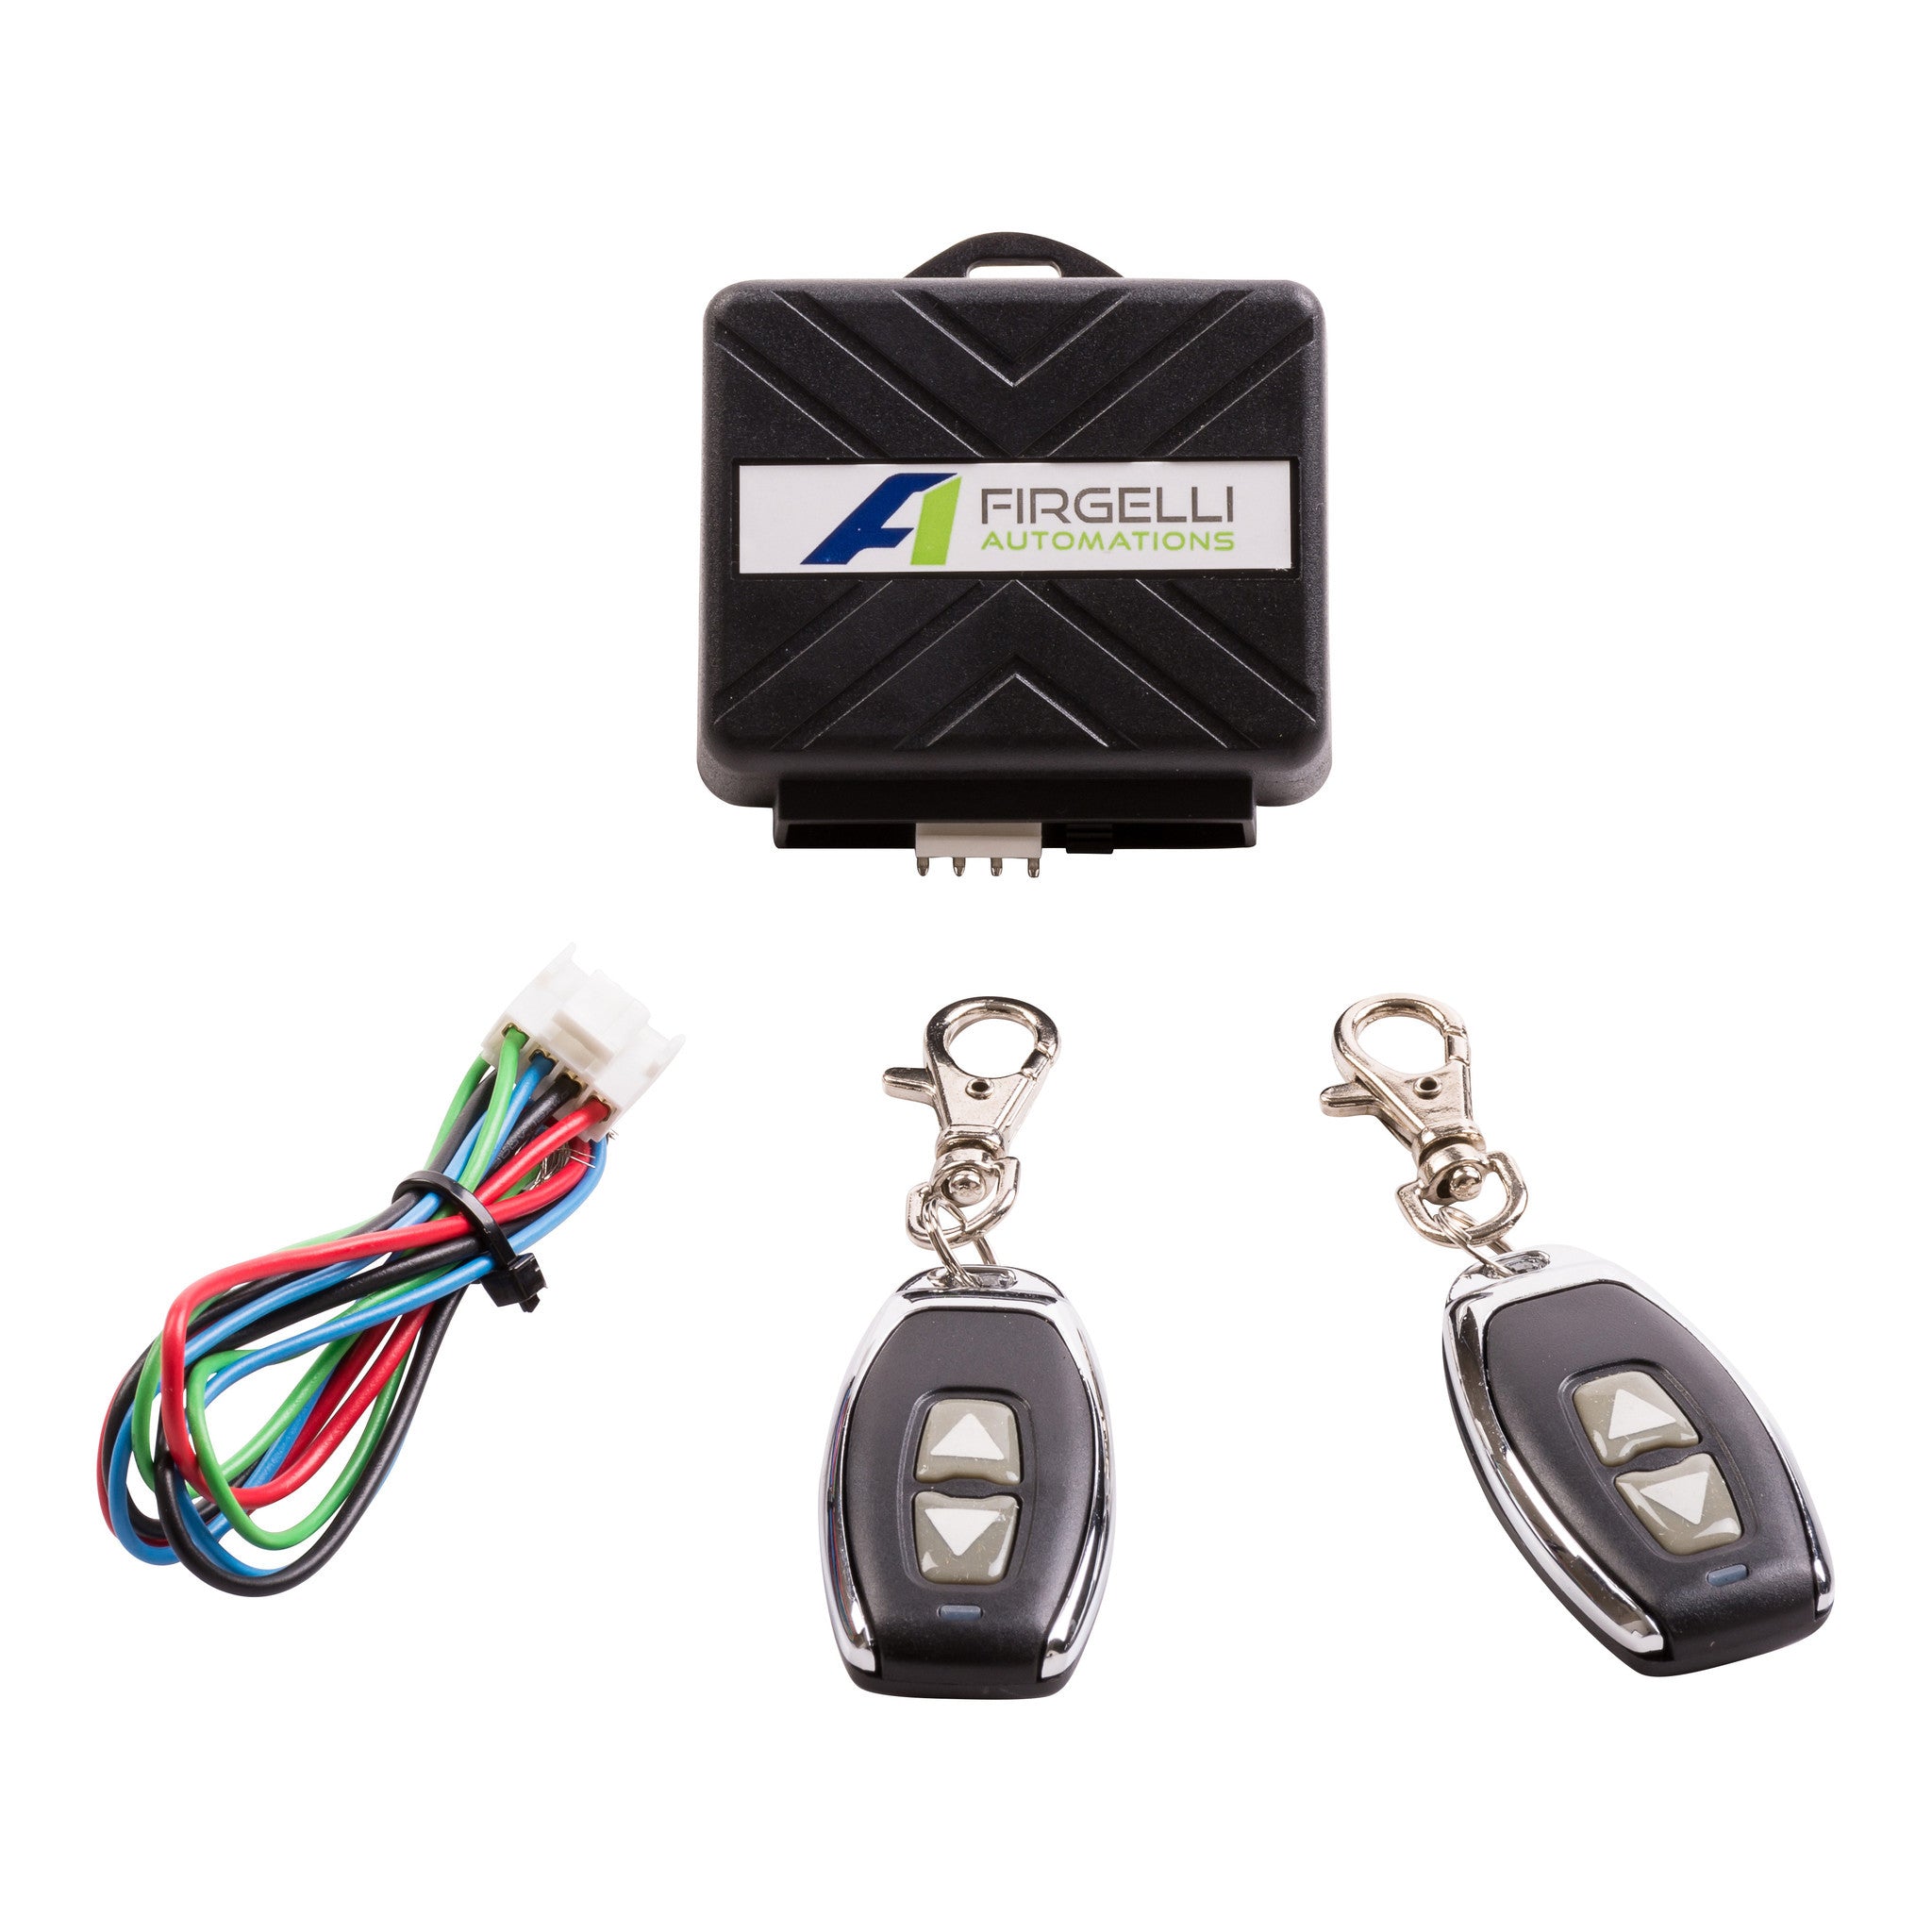 2 Channel Remote Control System Product Image